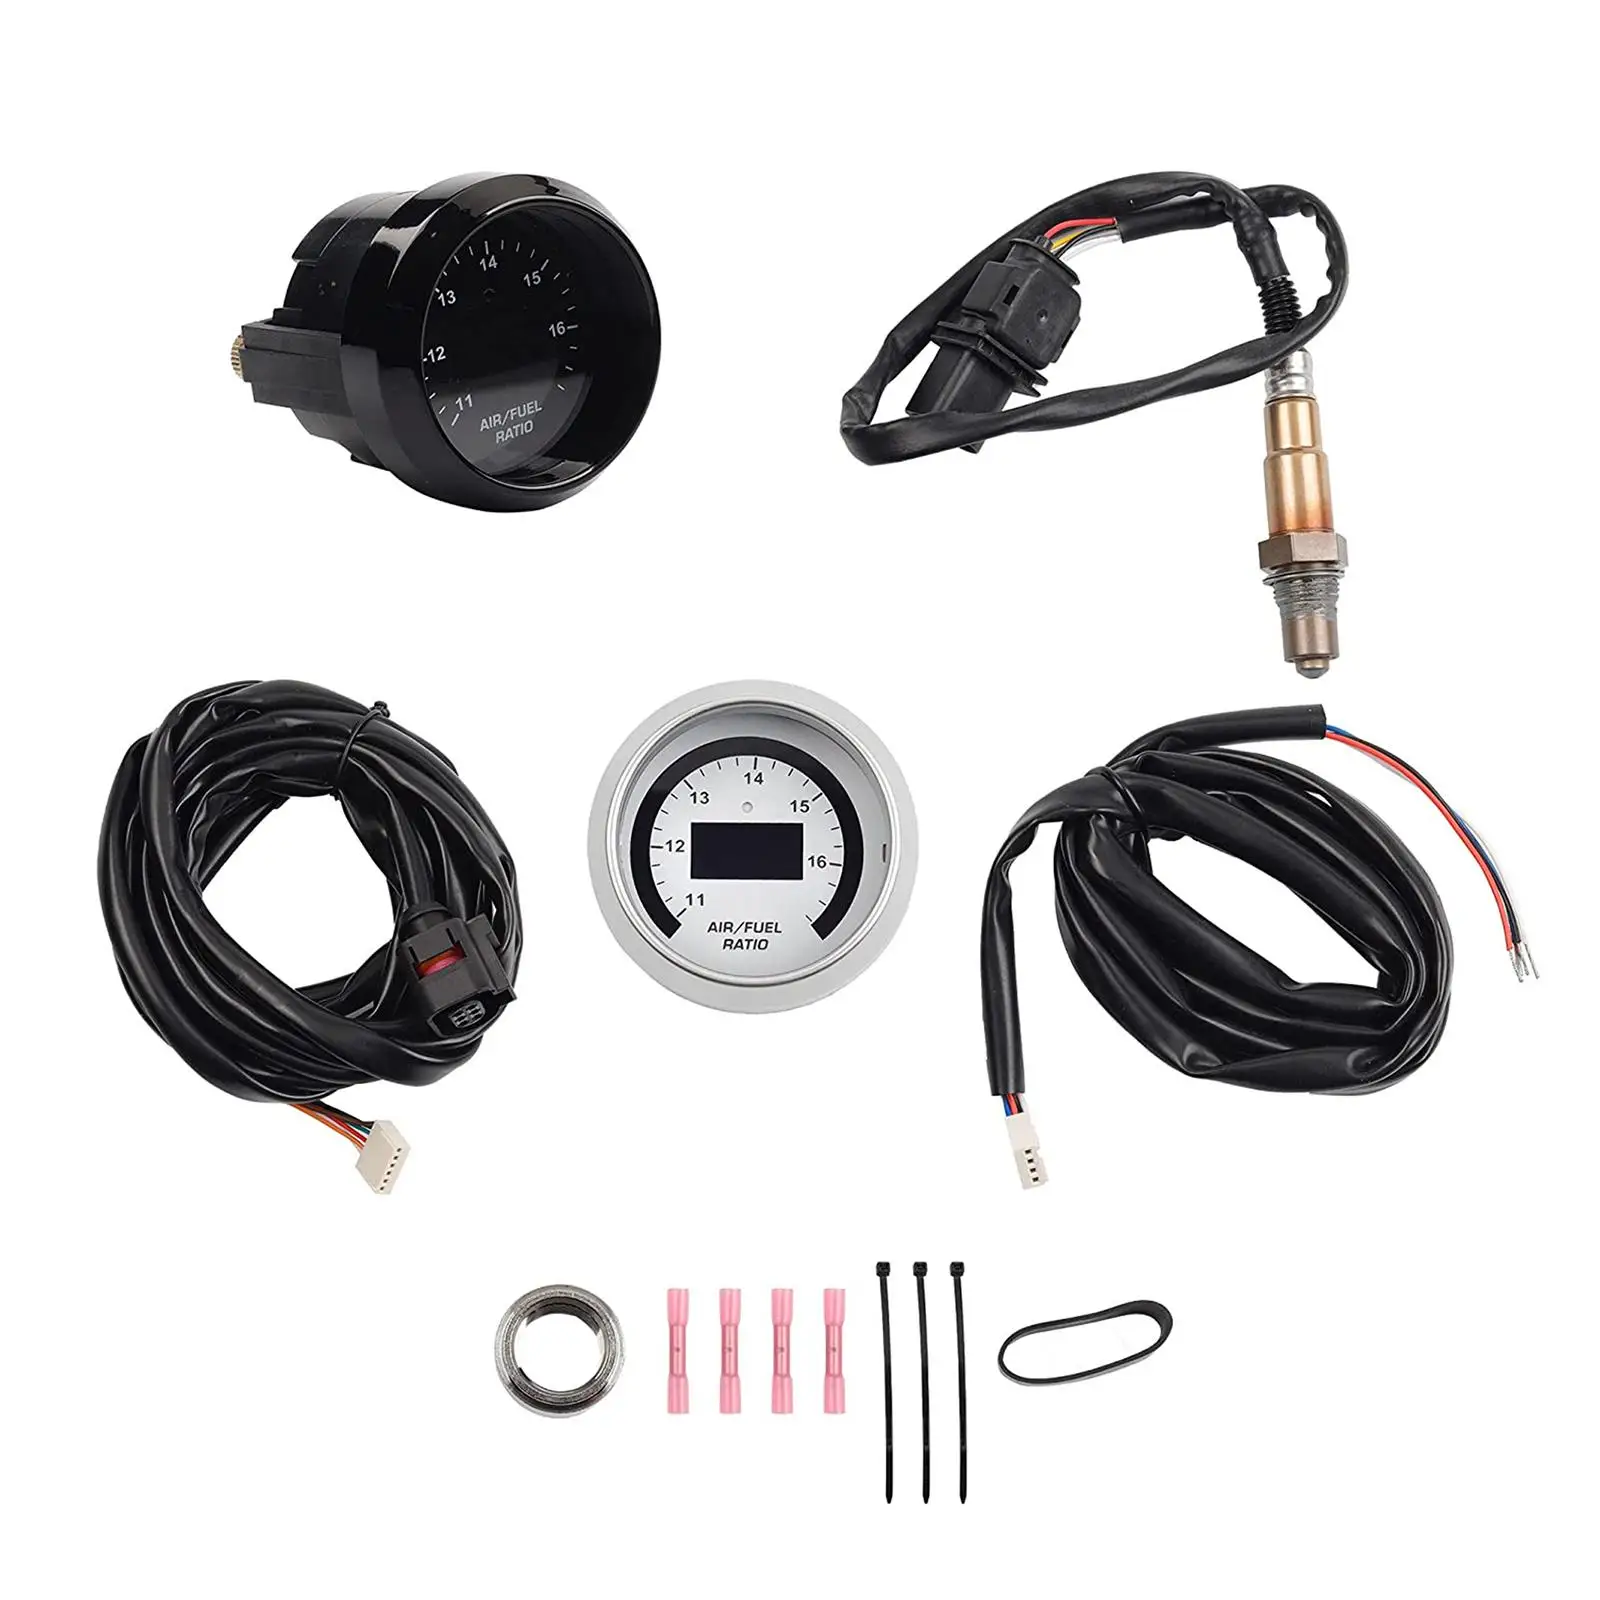 30-4110 Assembly Easy Installation Durable Replaces Air Fuel Ratio Gauge Set